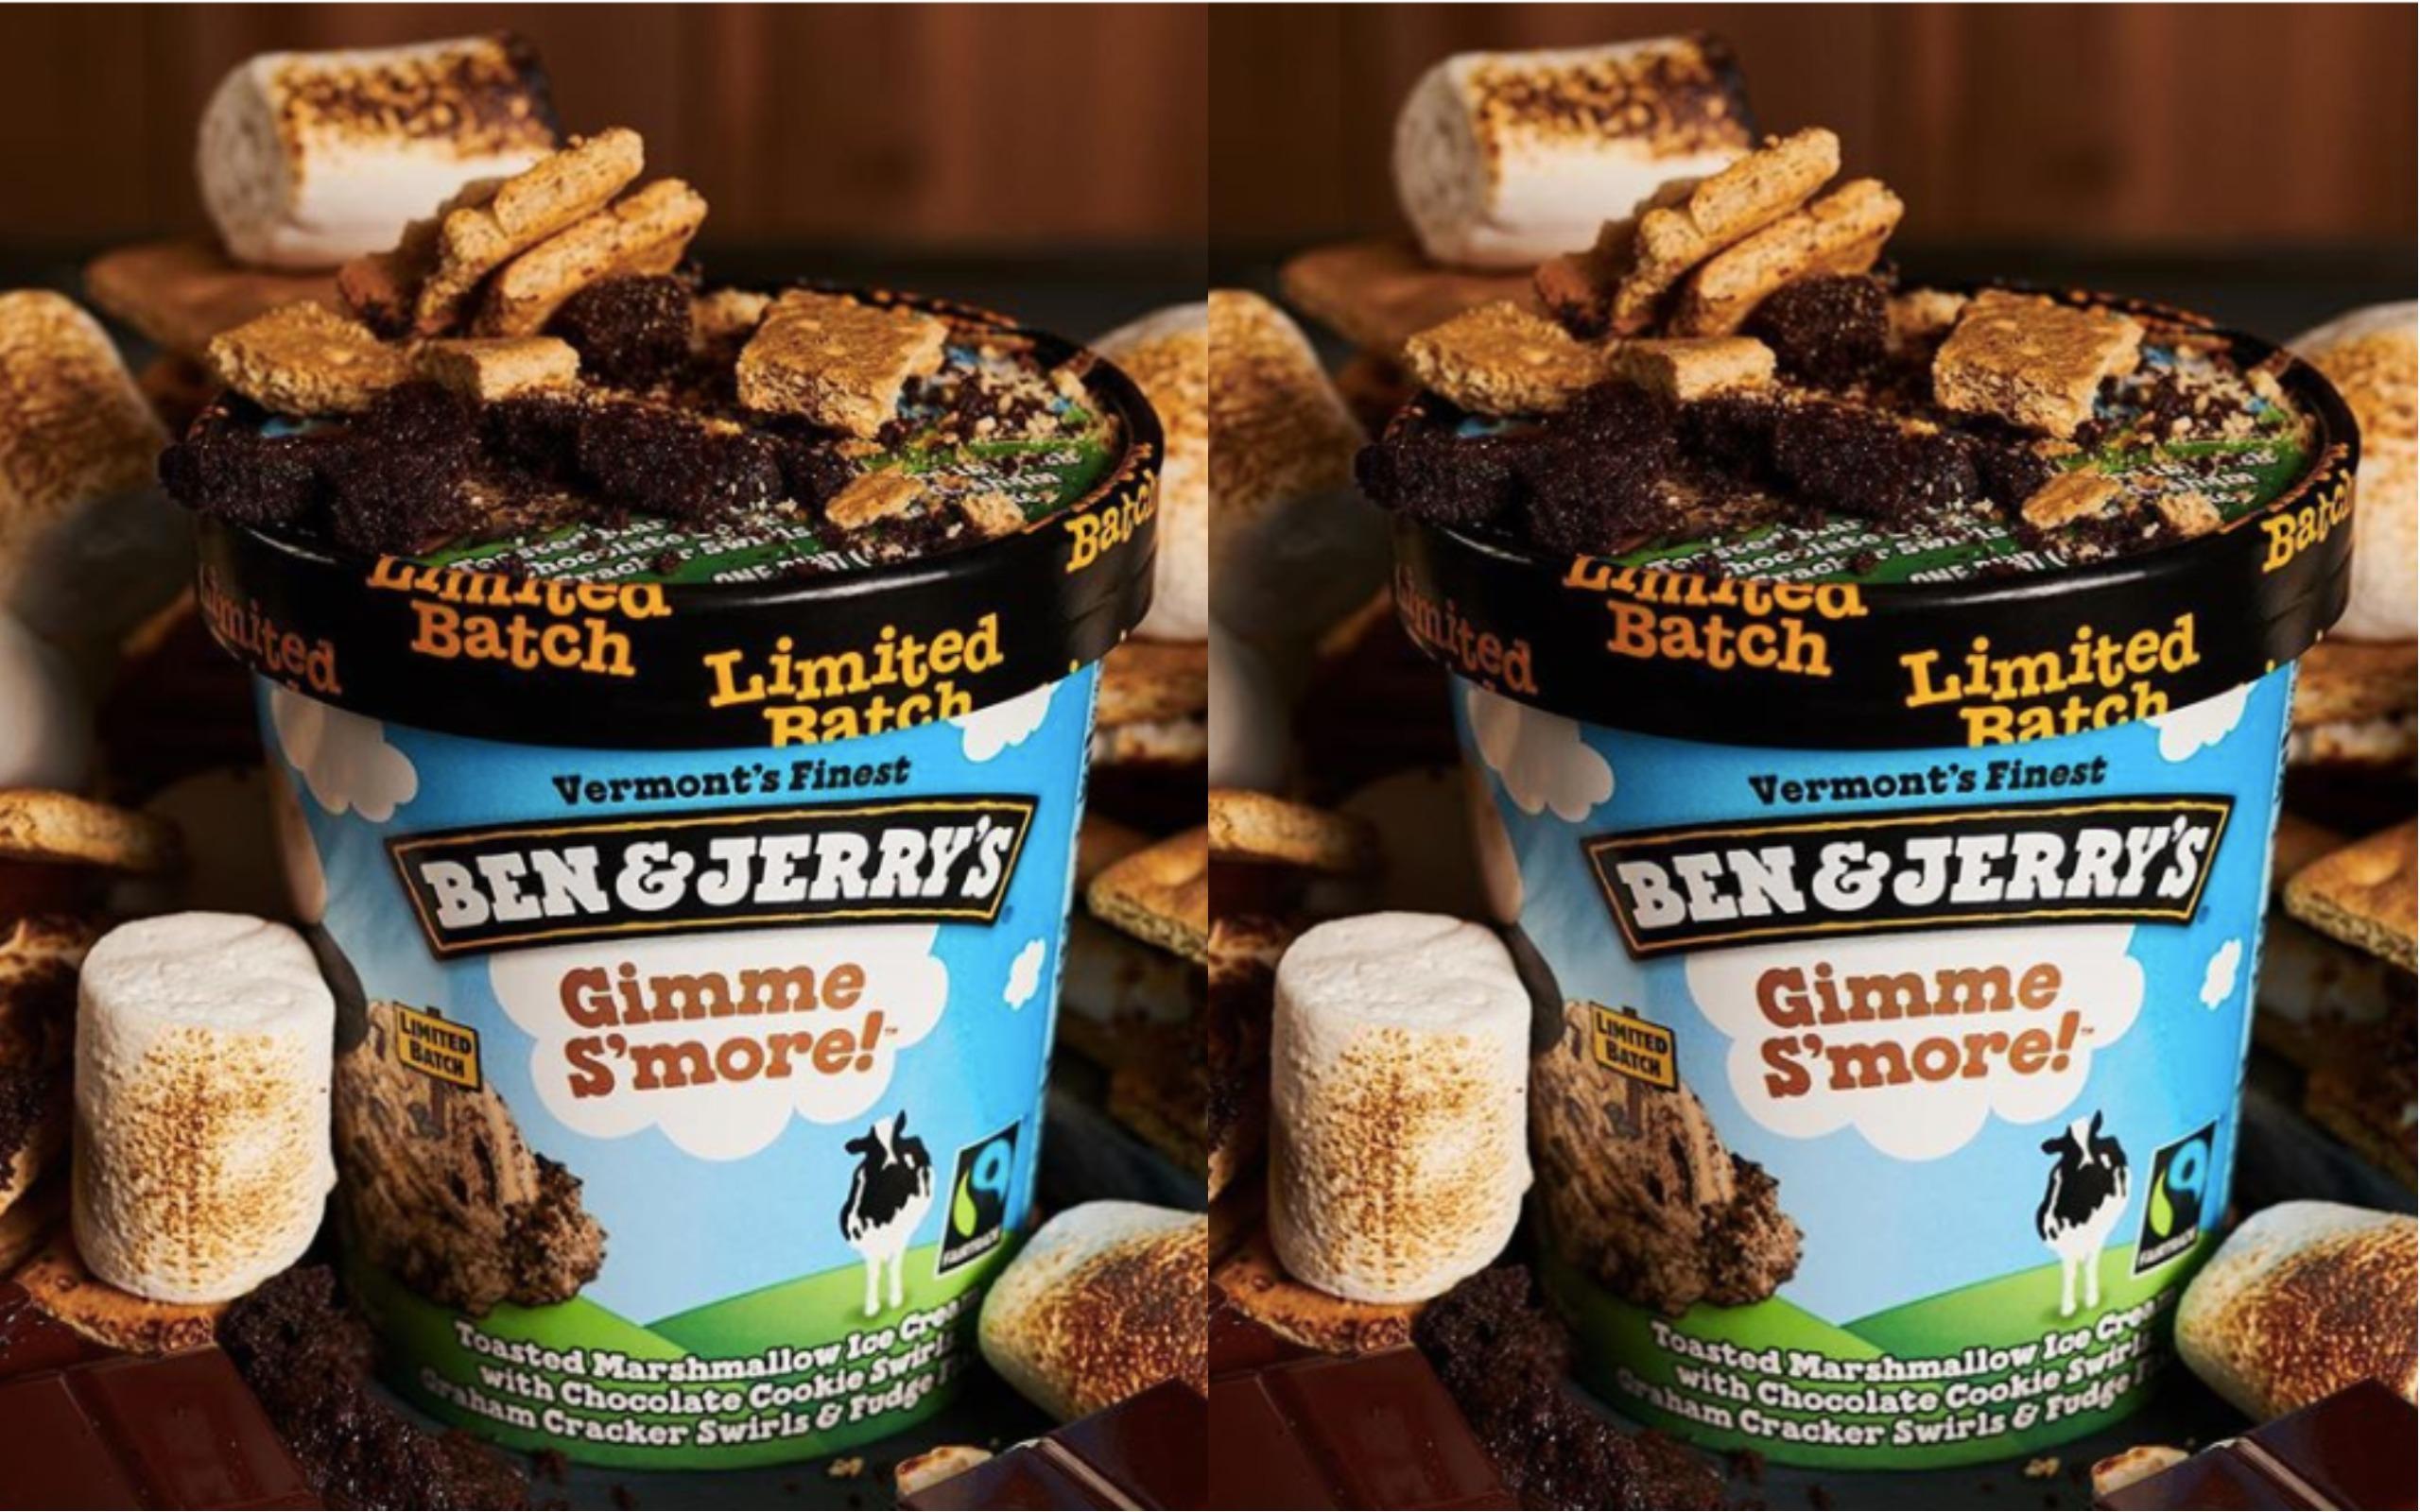 Ben & Jerry's Gimme S'mores Flavor Is A New Twist On A Summertime